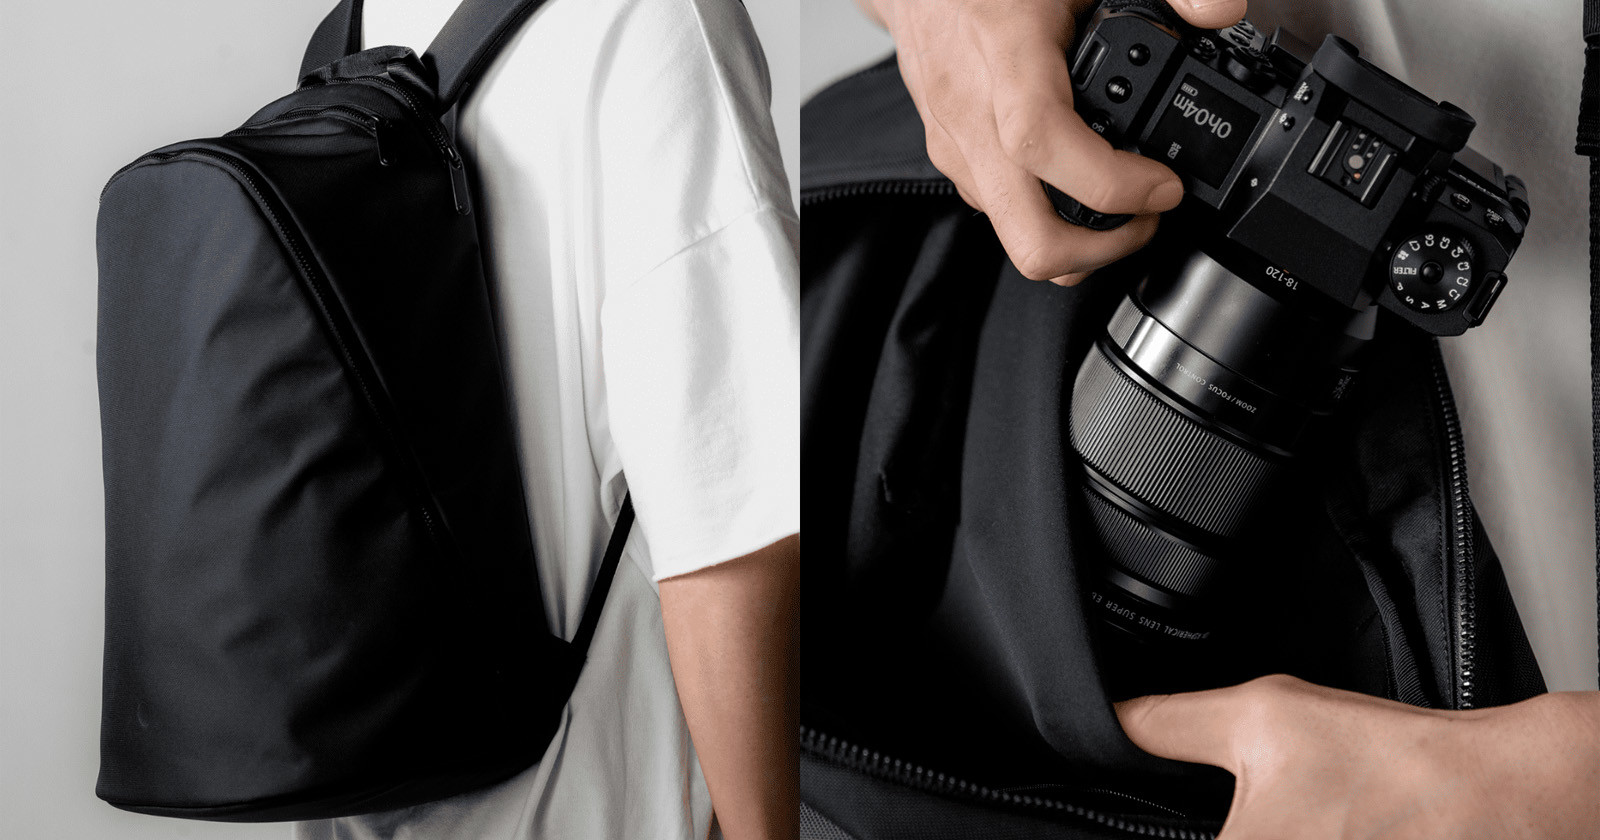 The Kyu is Less a Camera Bag and More a Daypack That Holds a Camera